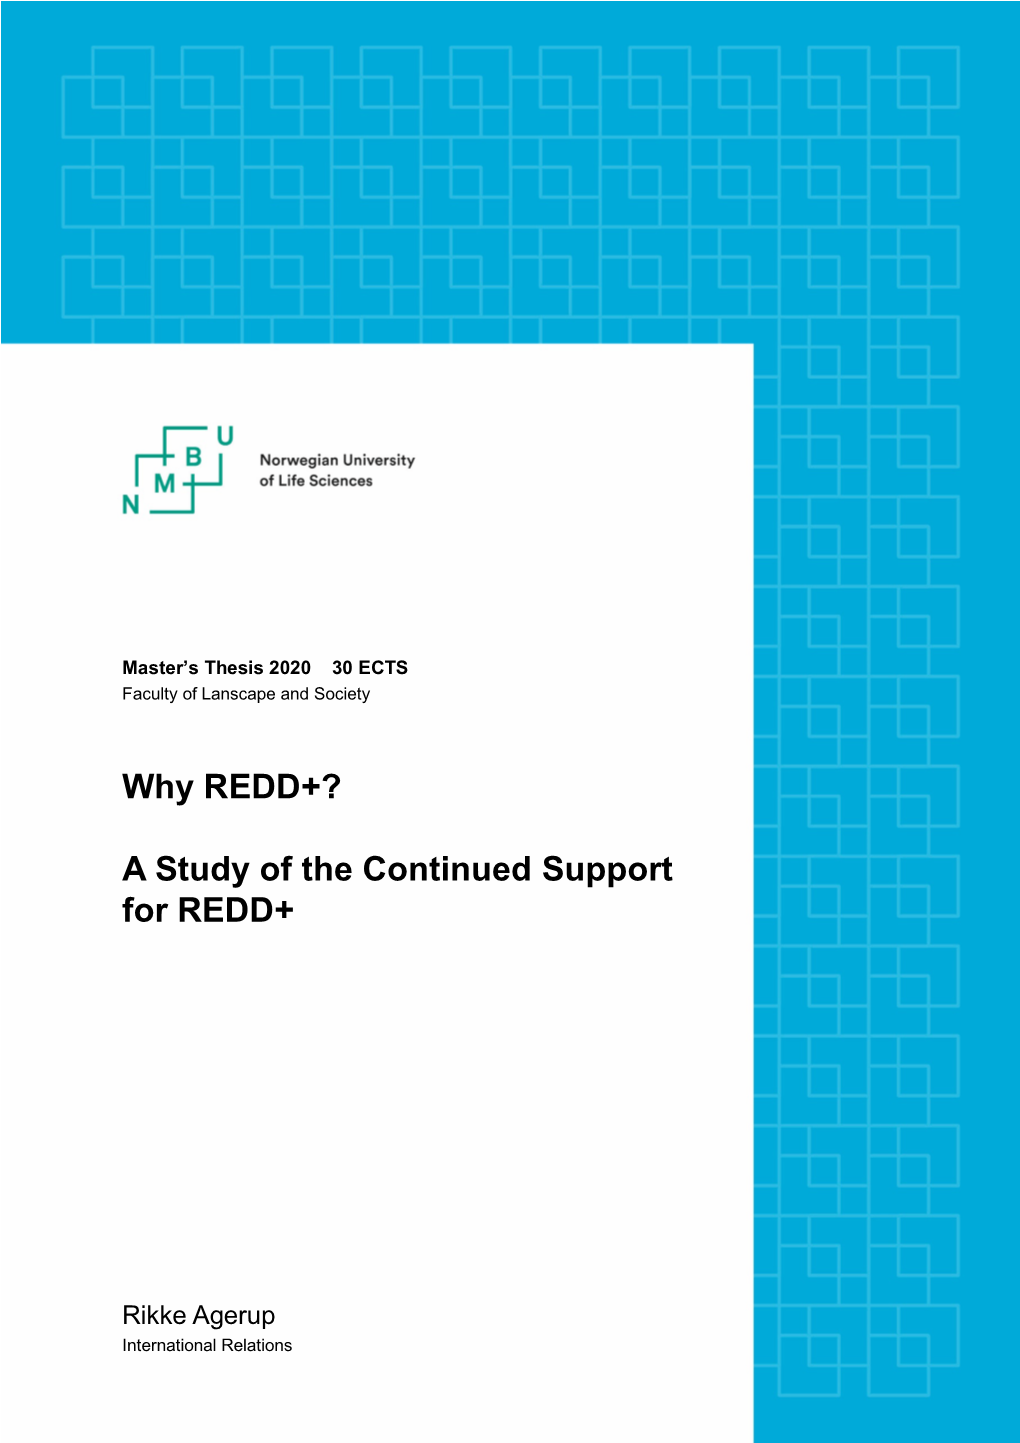 A Study of the Continued Support for REDD+